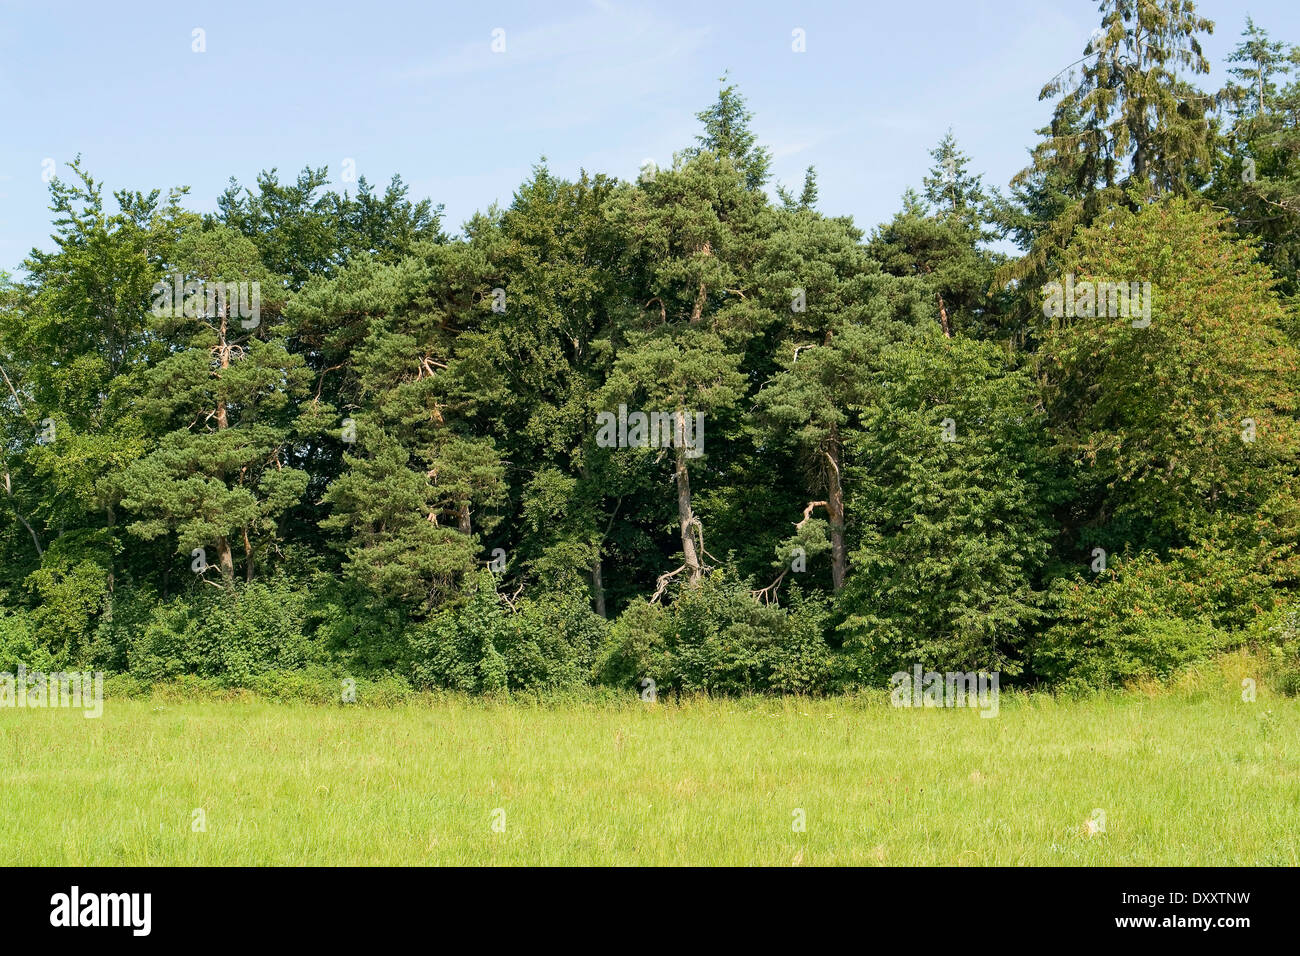 edge of a forest at summer time in sunny ambiance Stock Photo